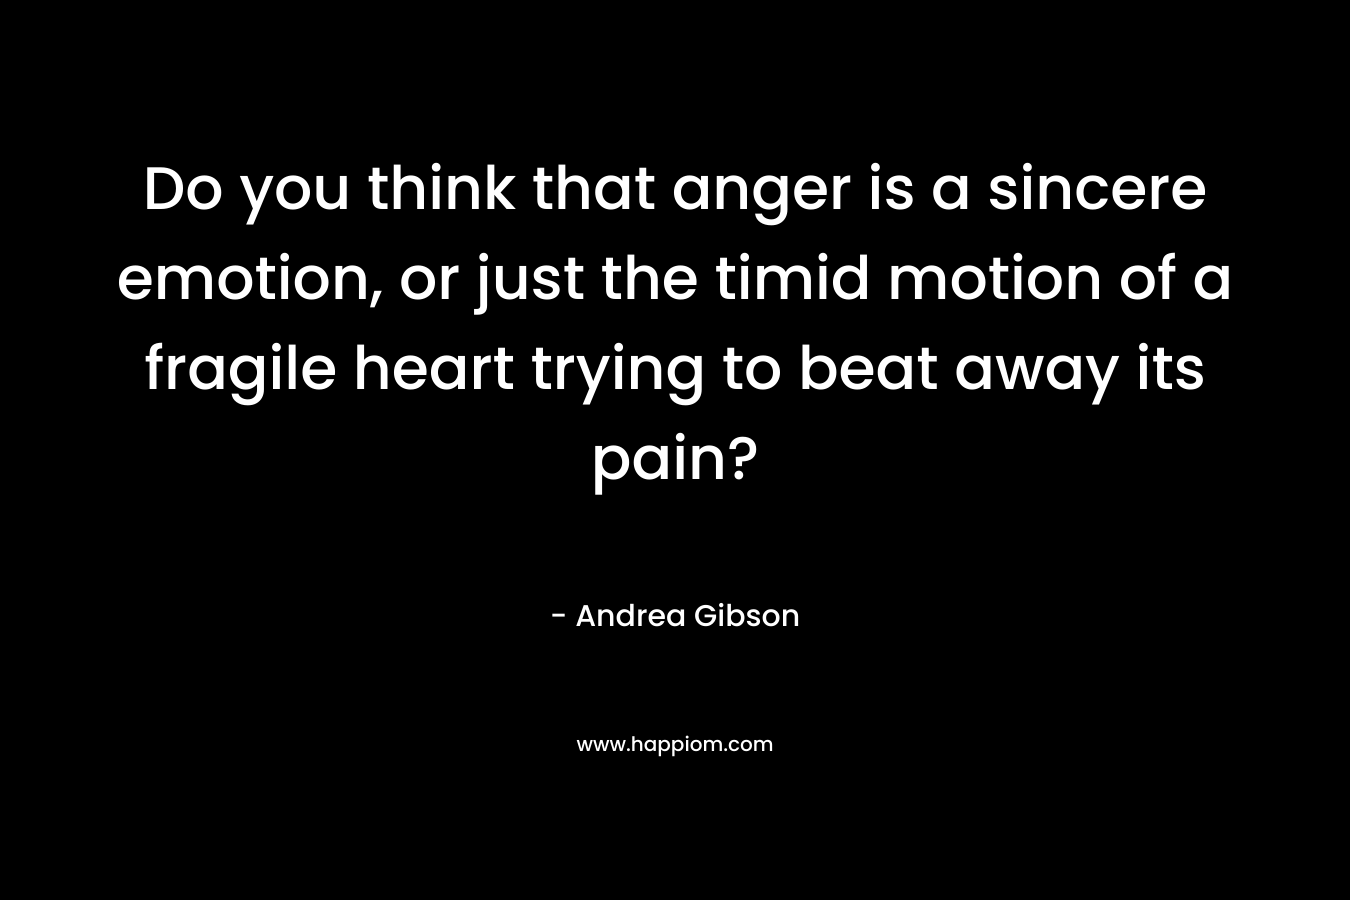 Do you think that anger is a sincere emotion, or just the timid motion of a fragile heart trying to beat away its pain? – Andrea Gibson